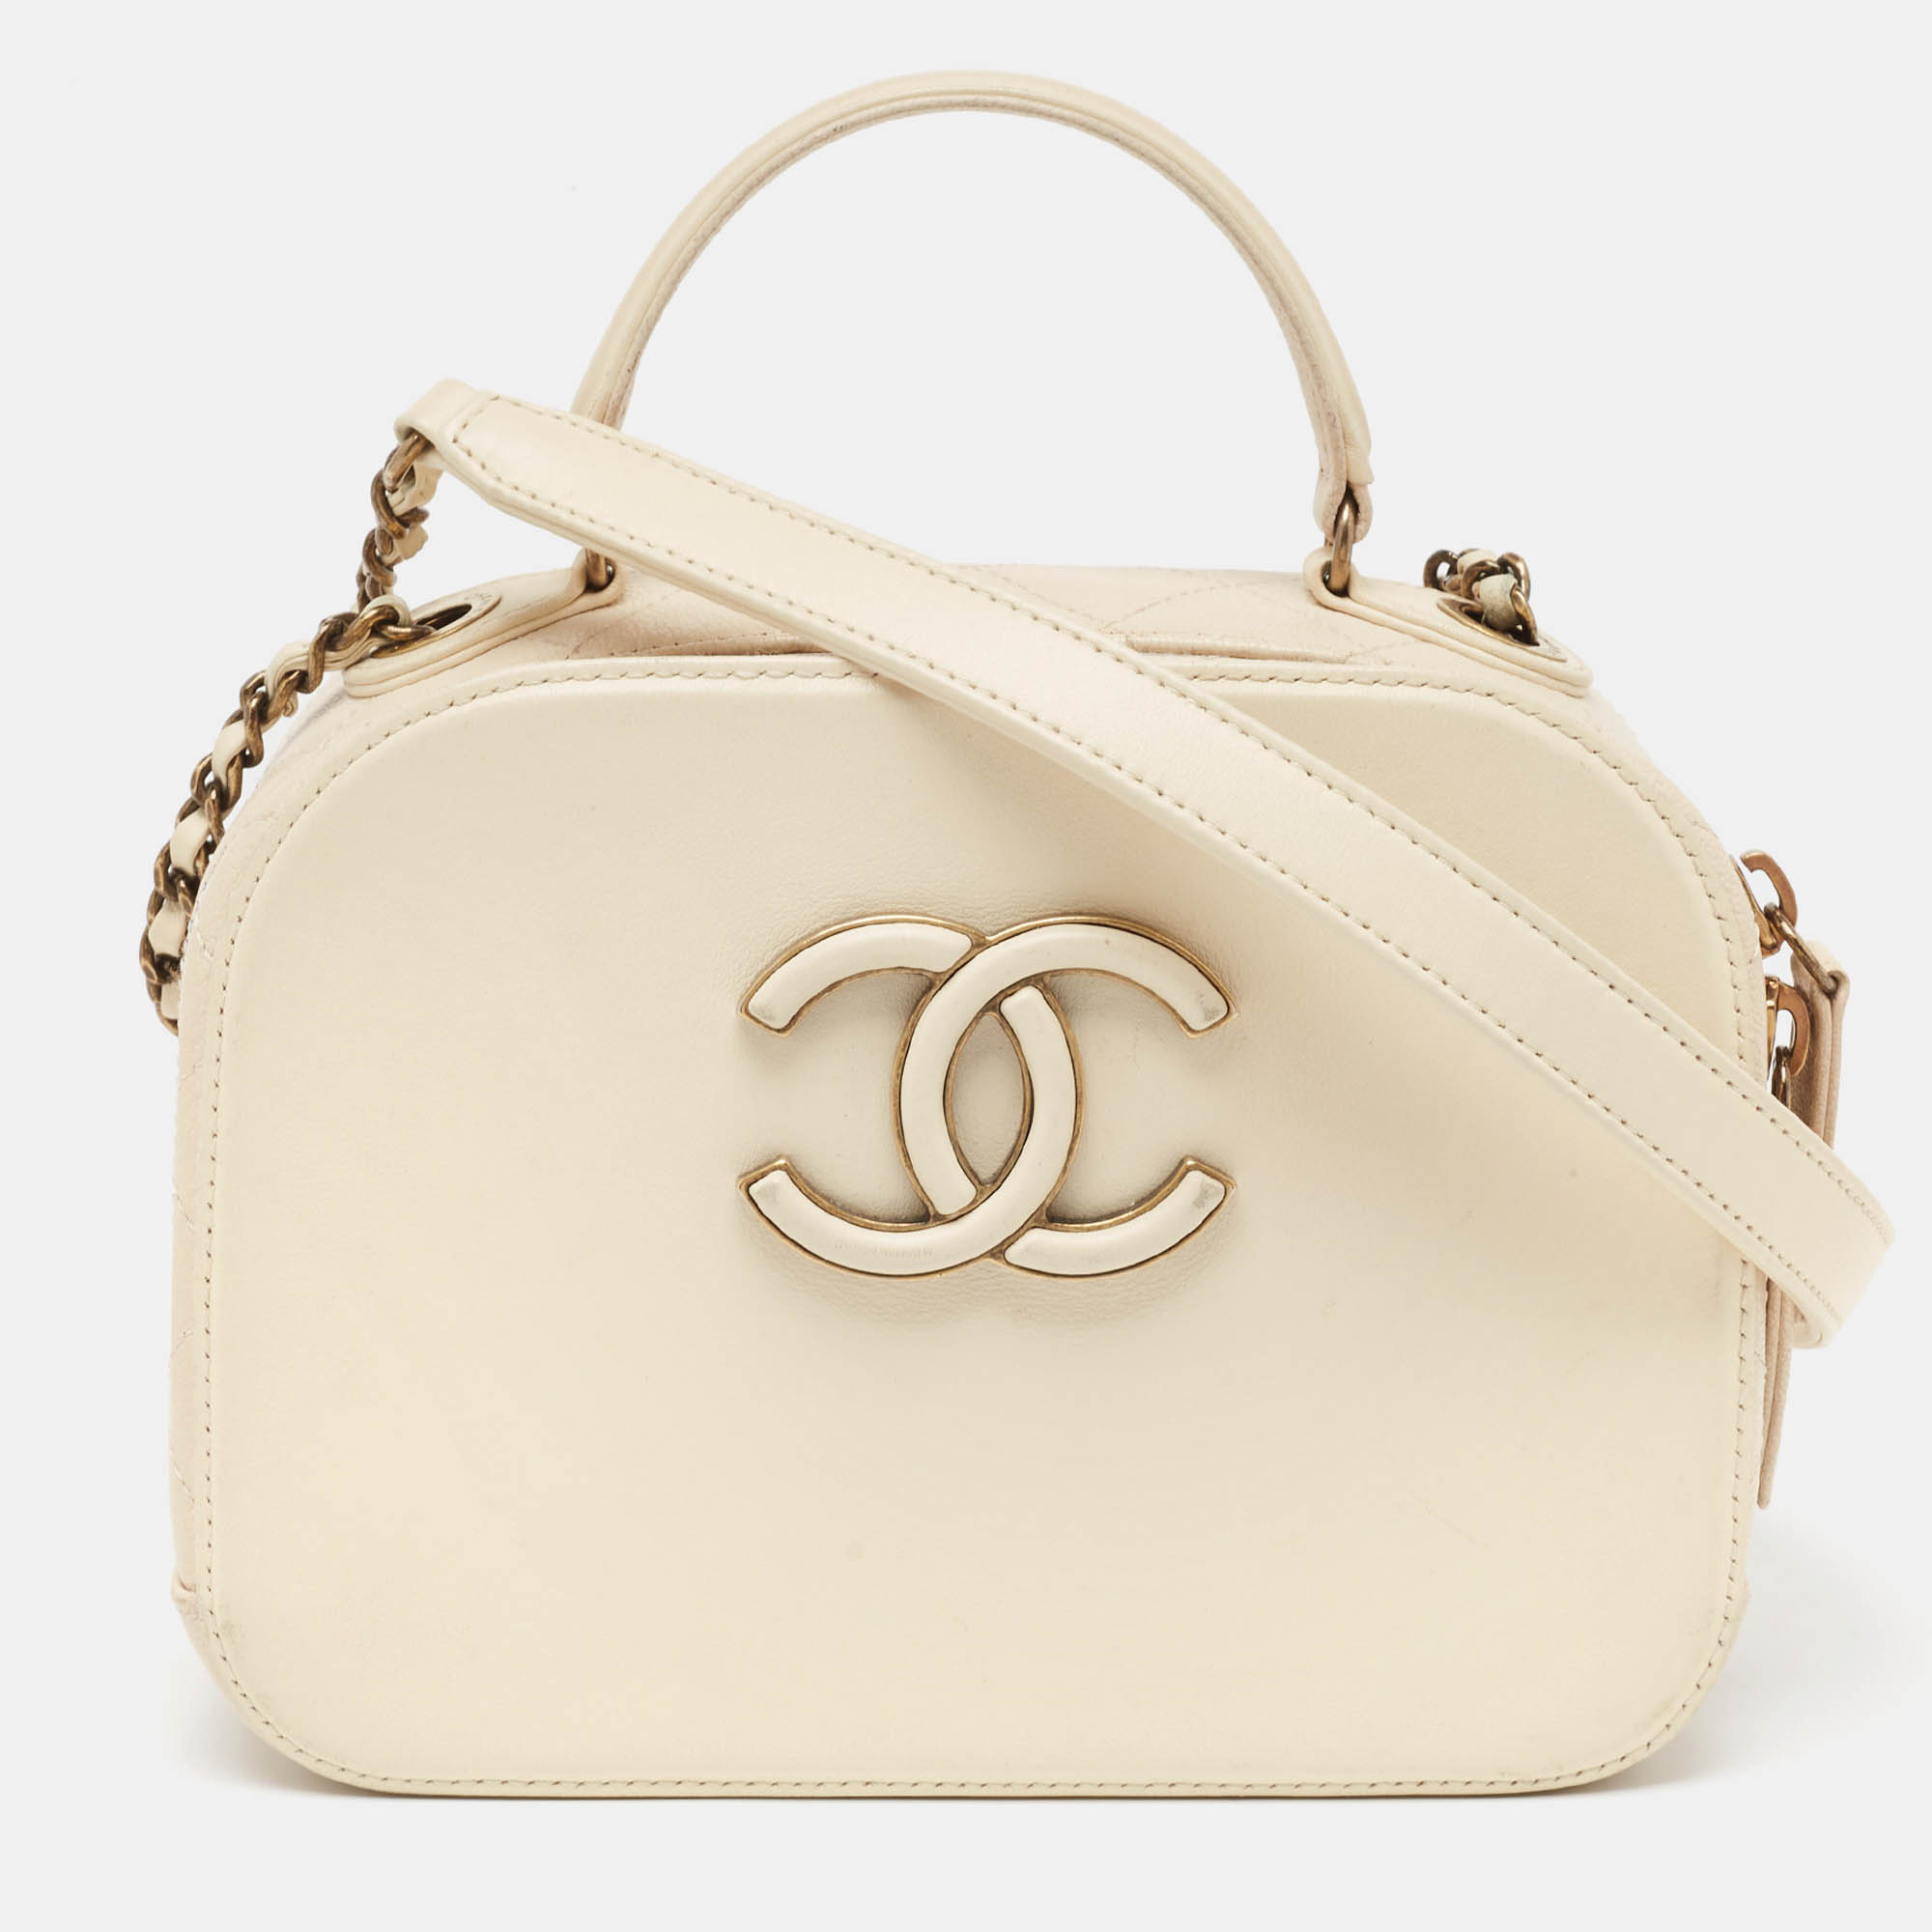 

Chanel Off White Quilted Leather Coco Curve Vanity Case Bag